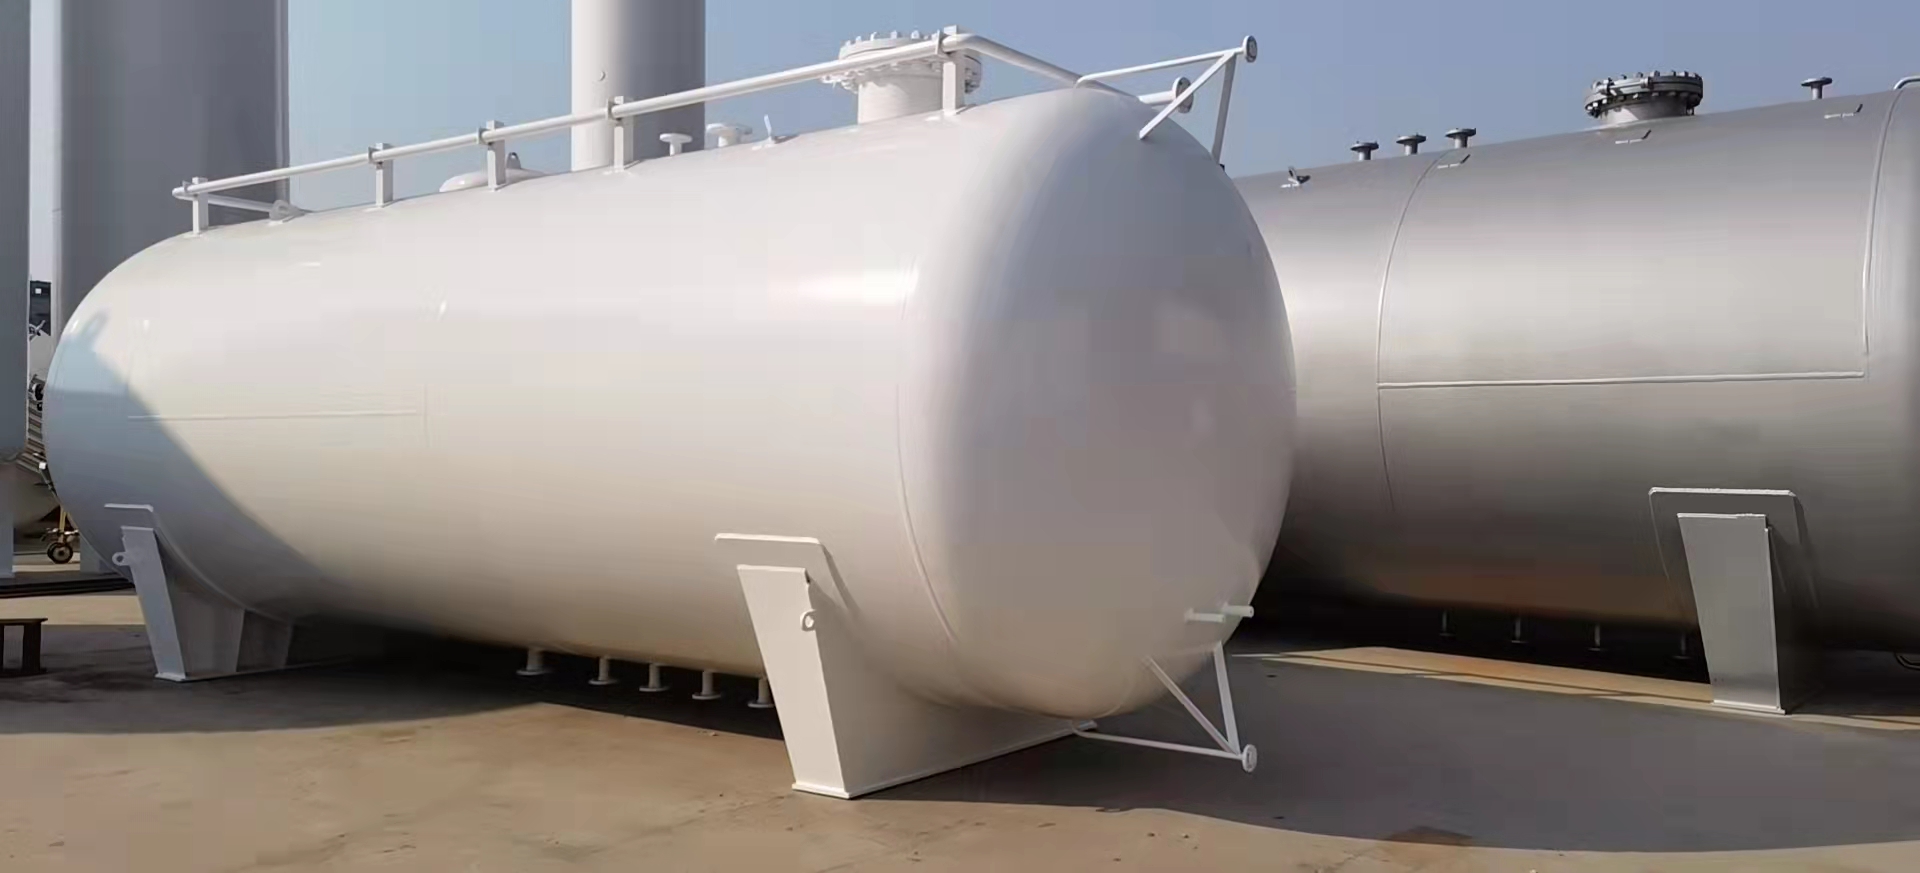 50,000 liters propane gas storage tank for Africa